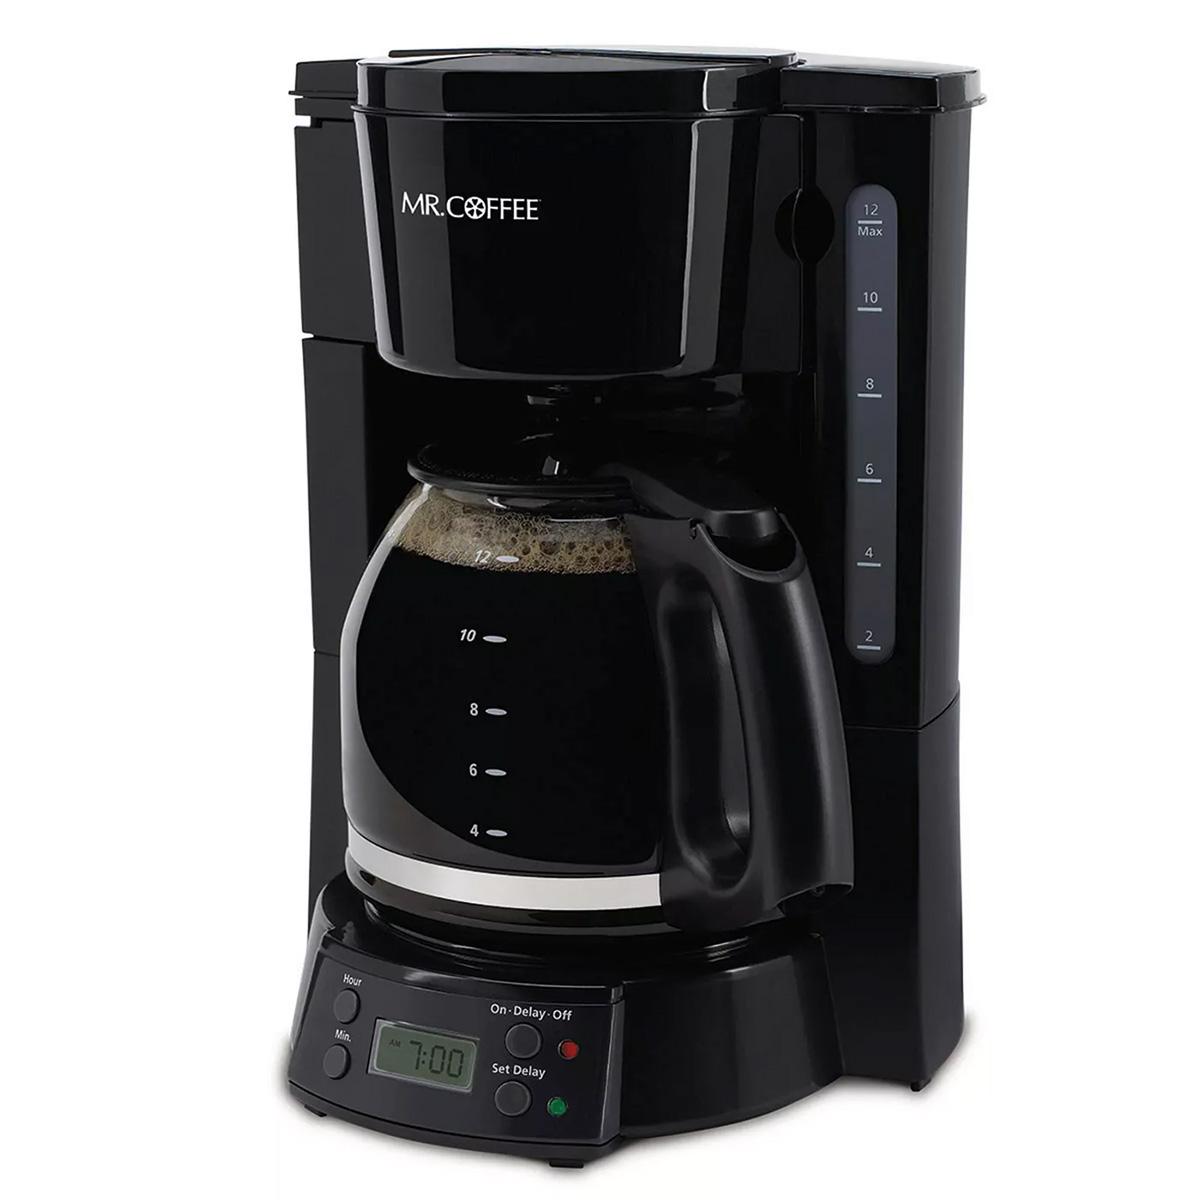 Mr Coffee 12-Cup Programmable Coffee Maker for $10